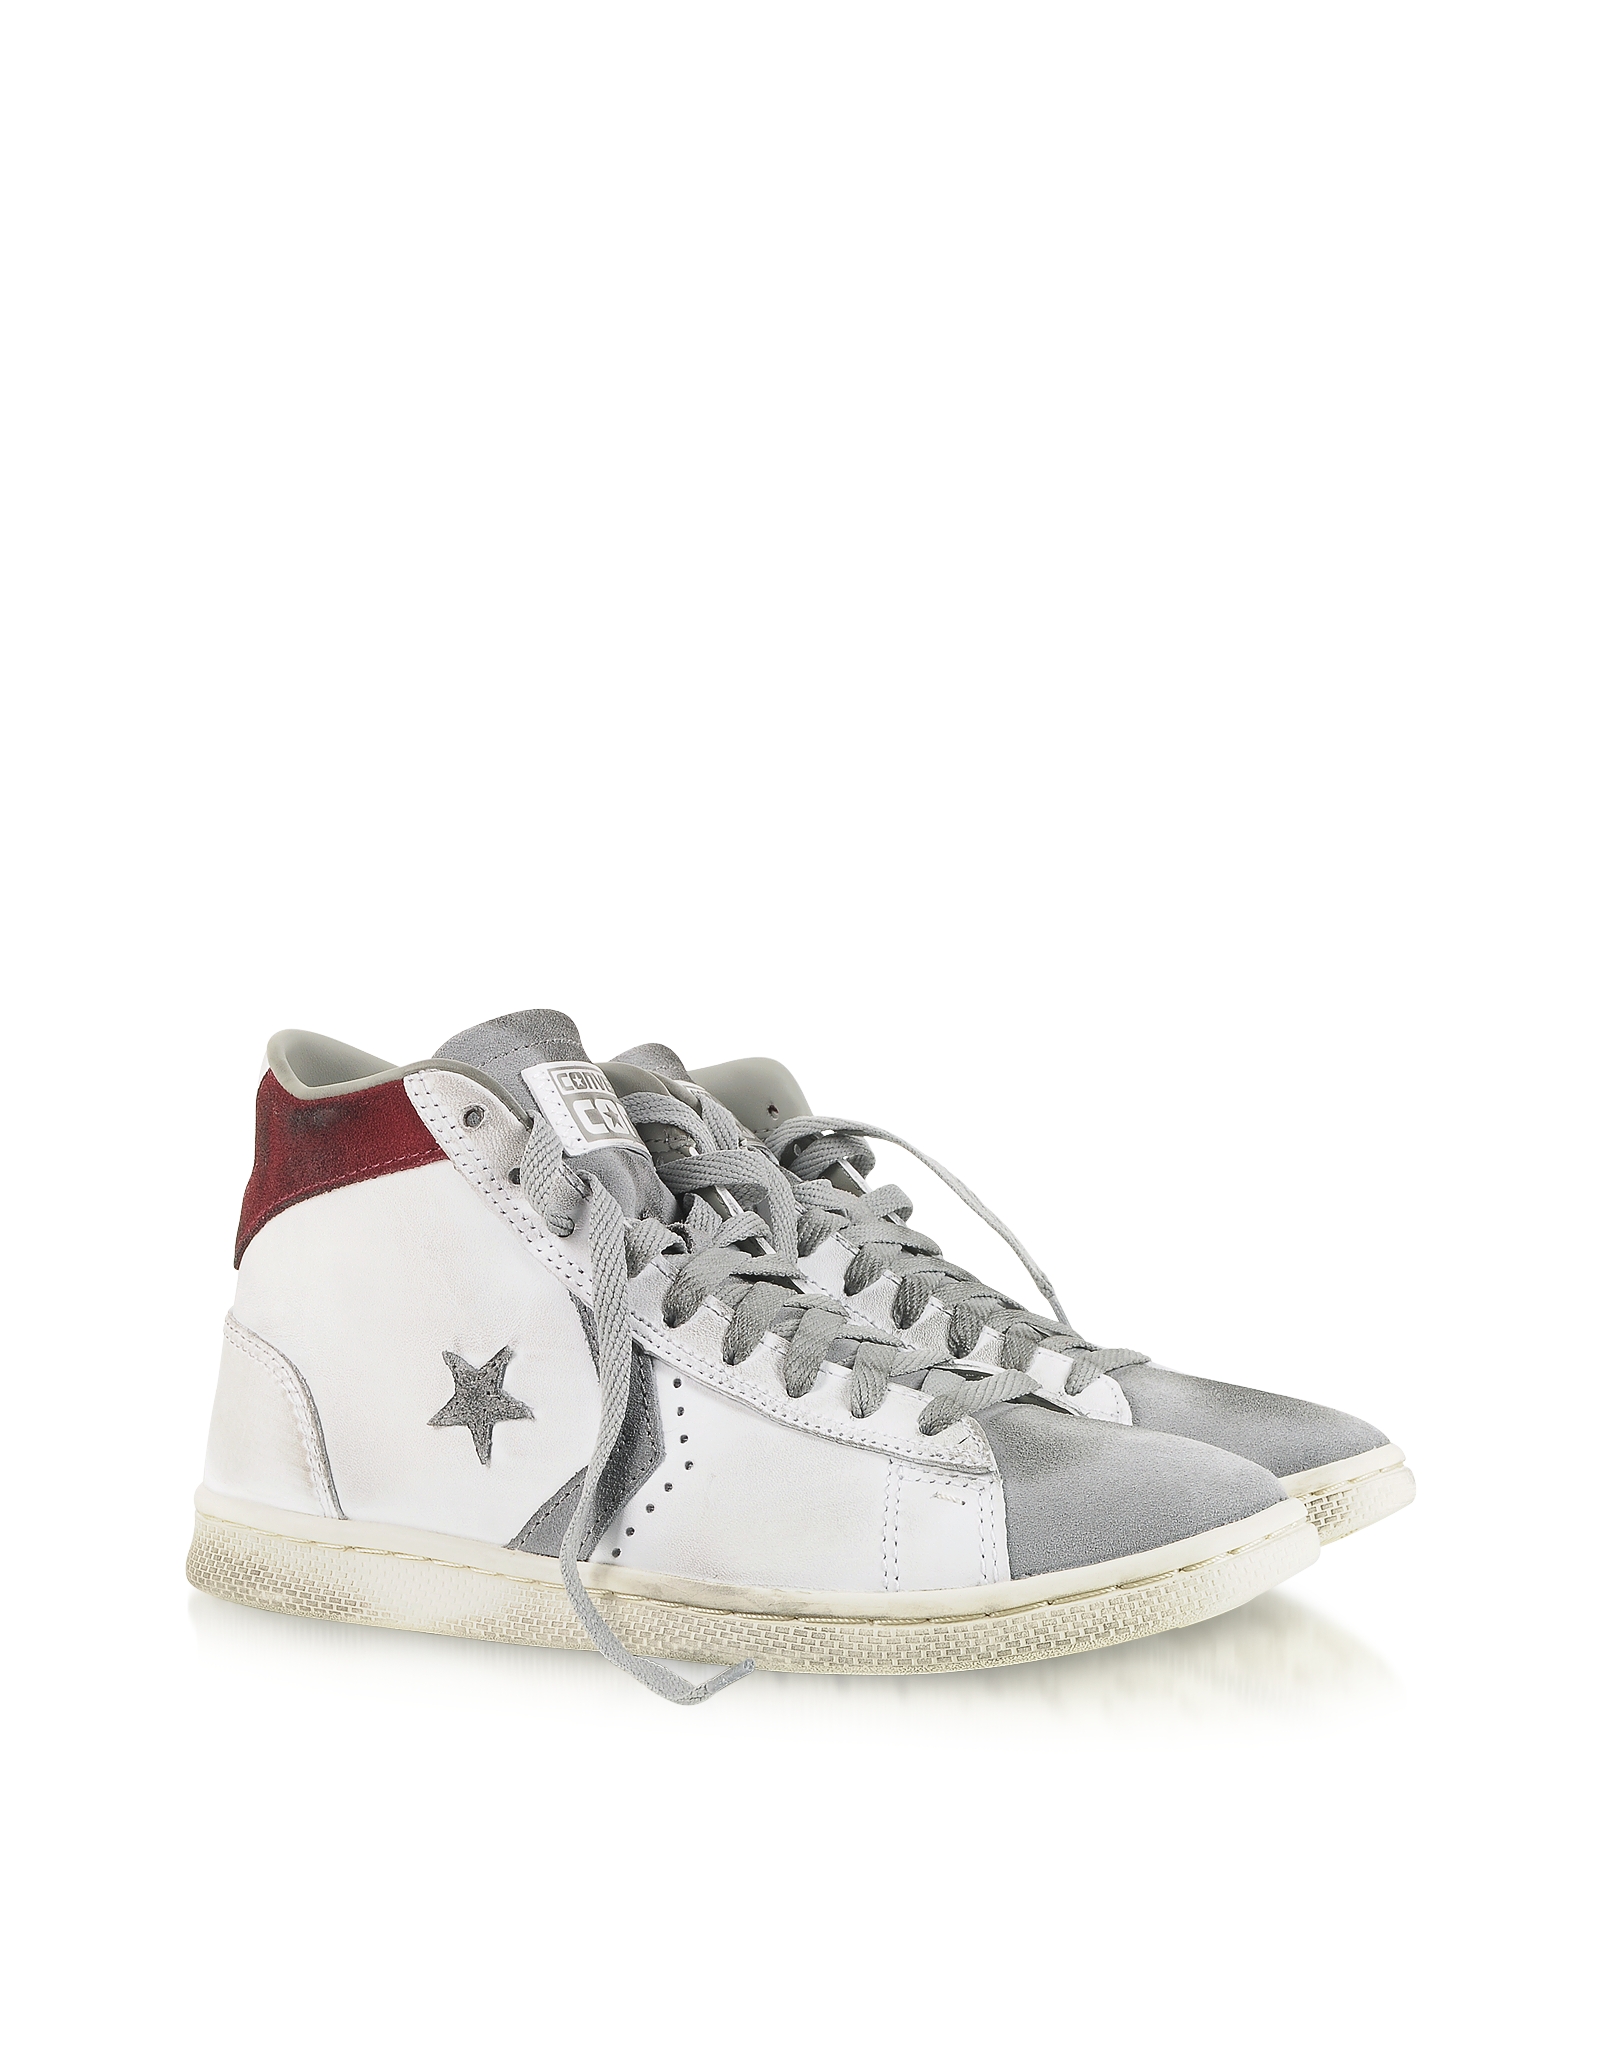 Converse Pro Leather Mid White Distressed Sneaker for Men - Lyst